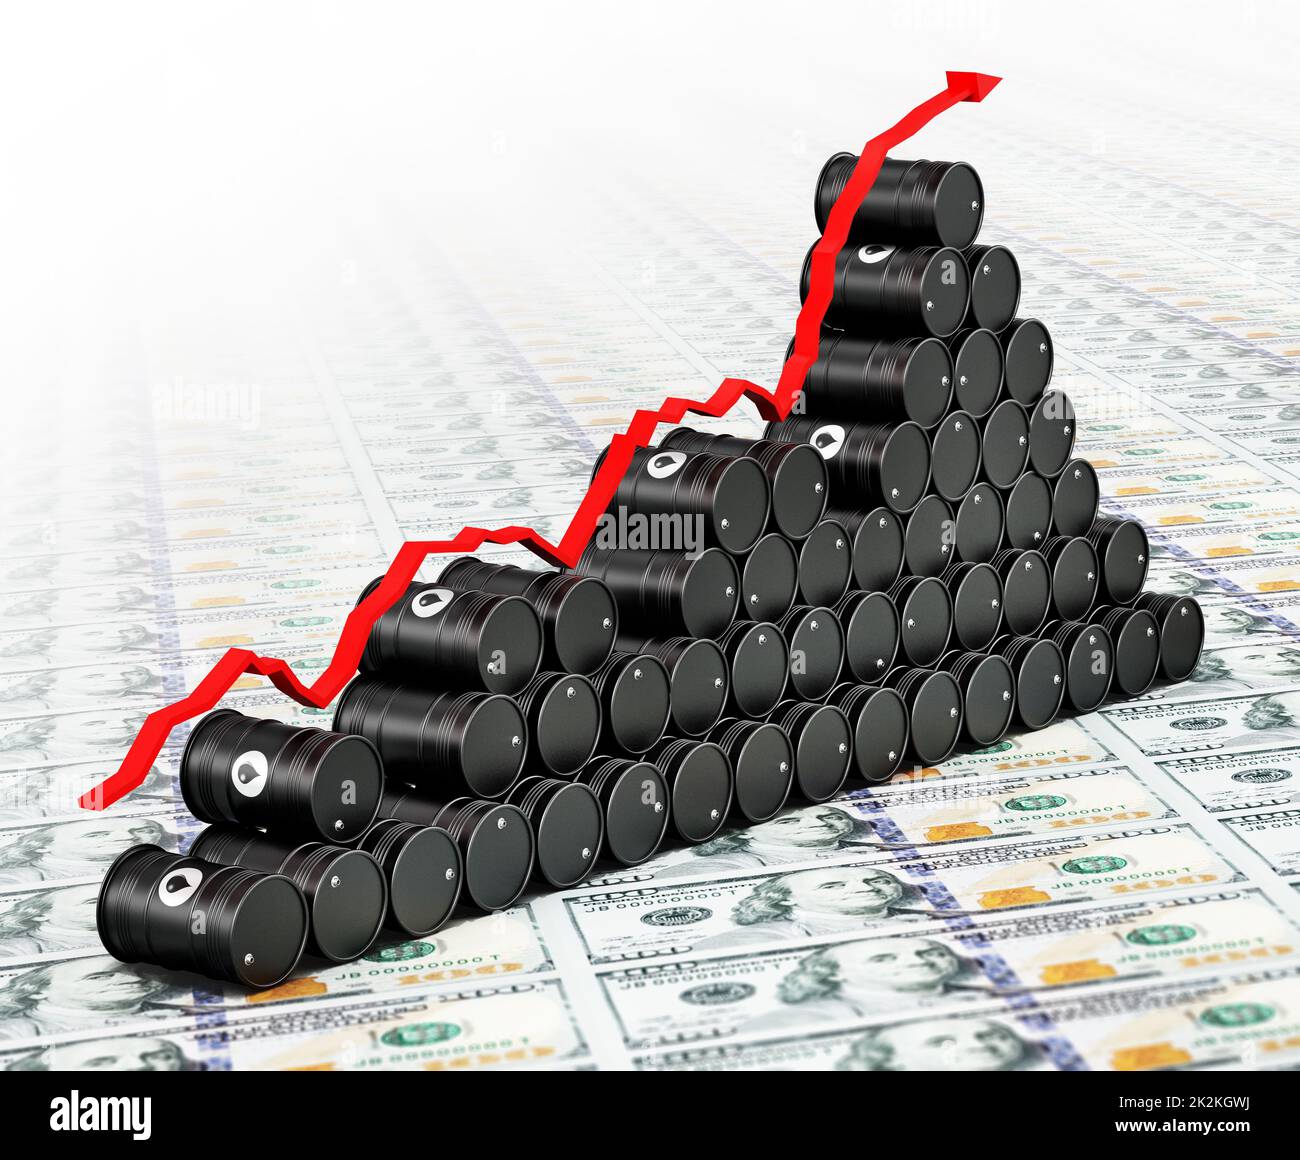 Crude oil drums standing on dollar bills. Rising oil prices concept. 3D illustration Stock Photo